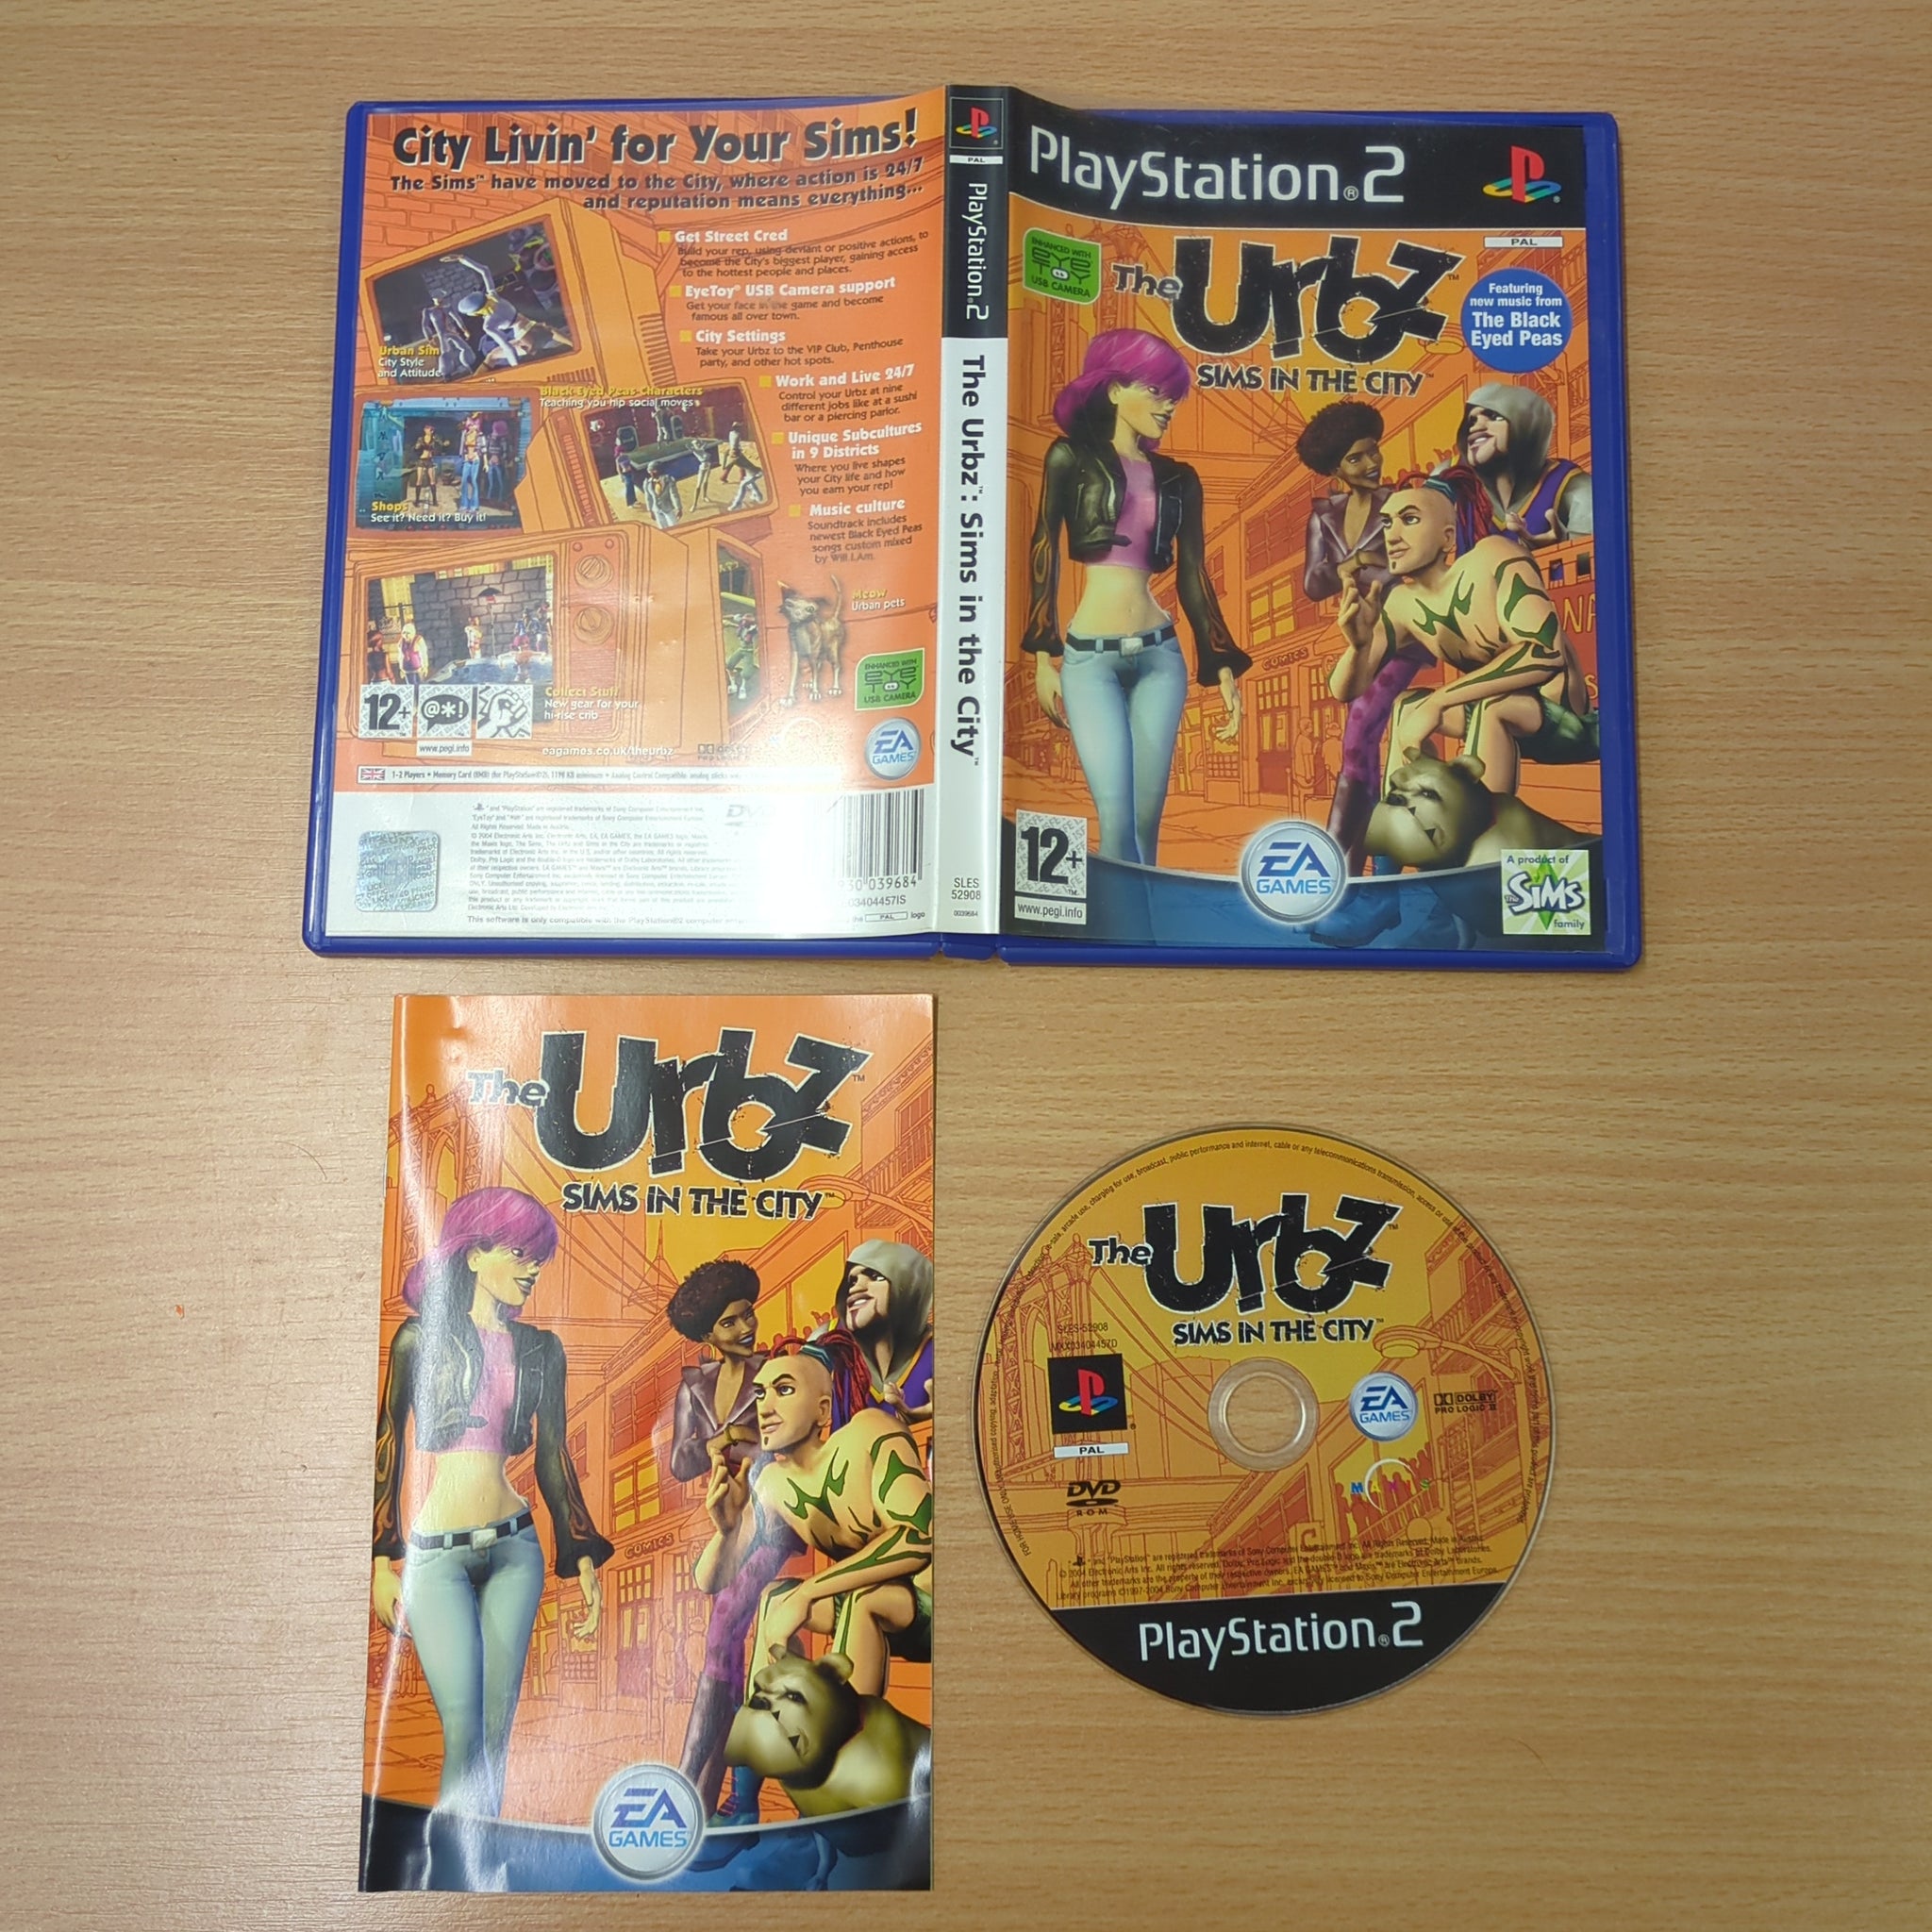 The Urbz: Sims in the City Sony PS2 game